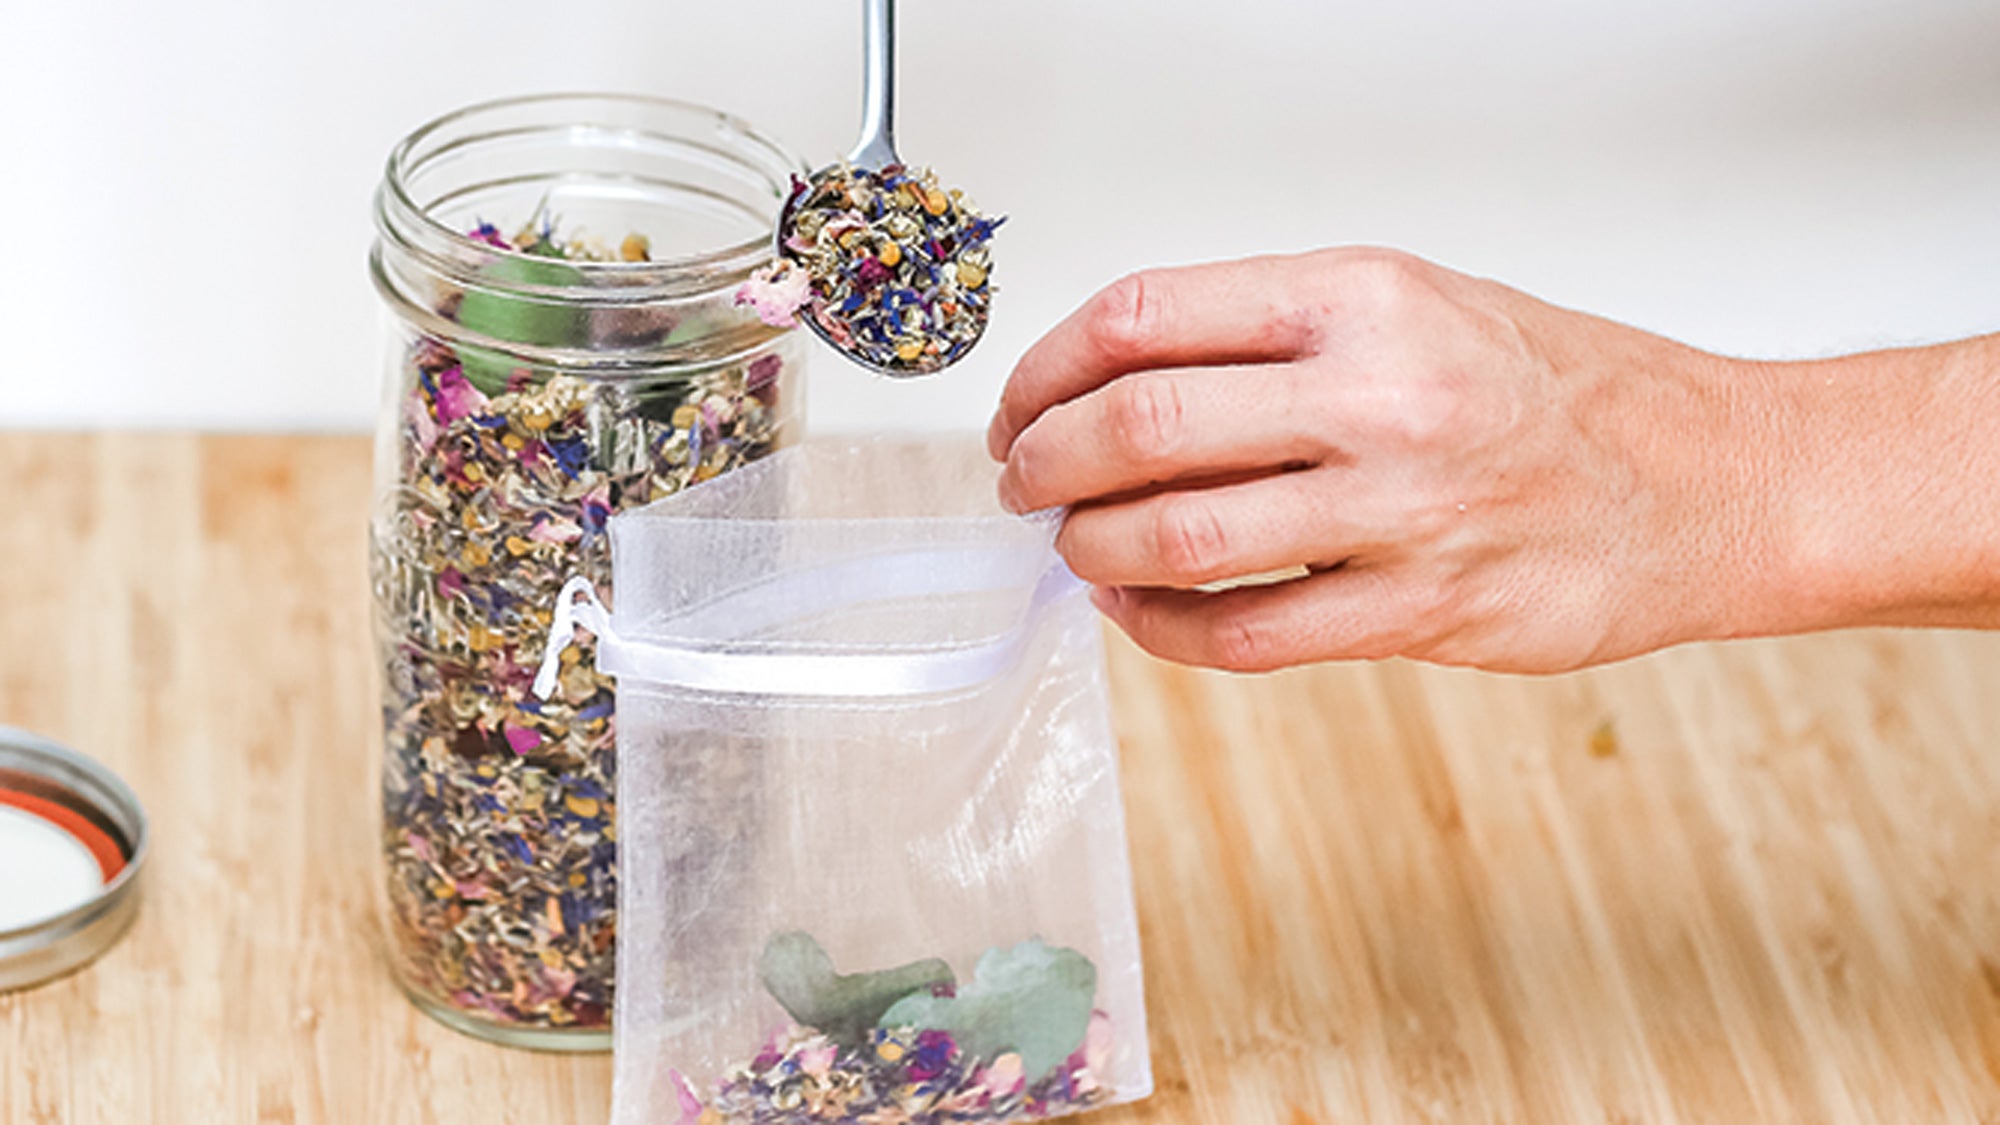 Craft for kids Make a DIY potpourri bag with an upcycled face mask   Kidspot